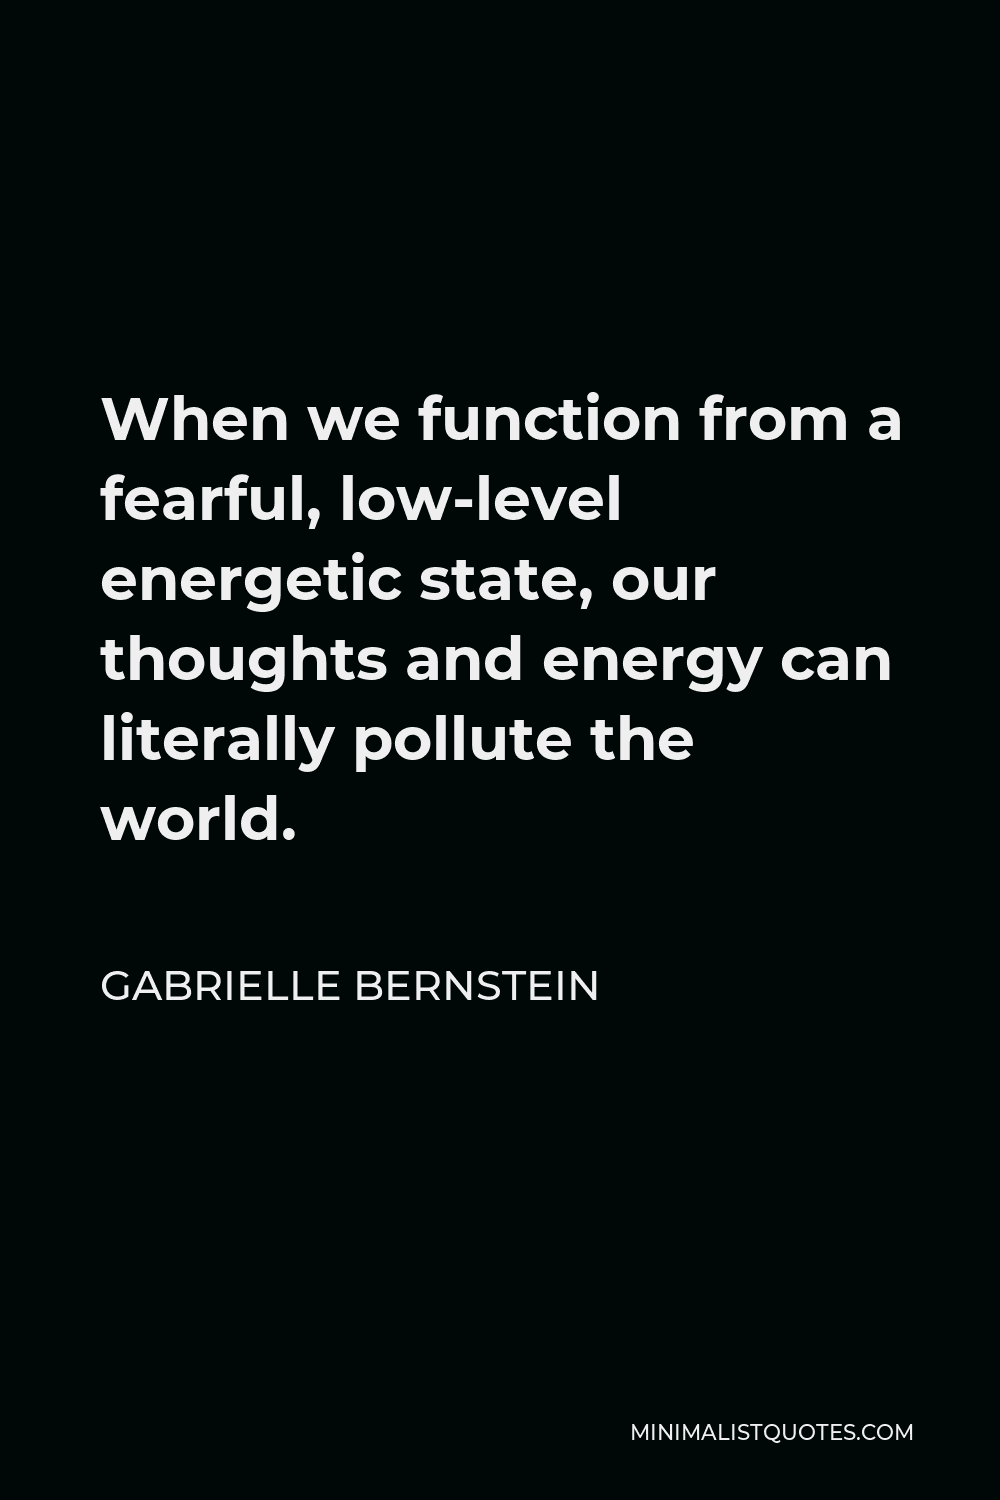 Gabrielle Bernstein Quote - When we function from a fearful, low-level energetic state, our thoughts and energy can literally pollute the world.